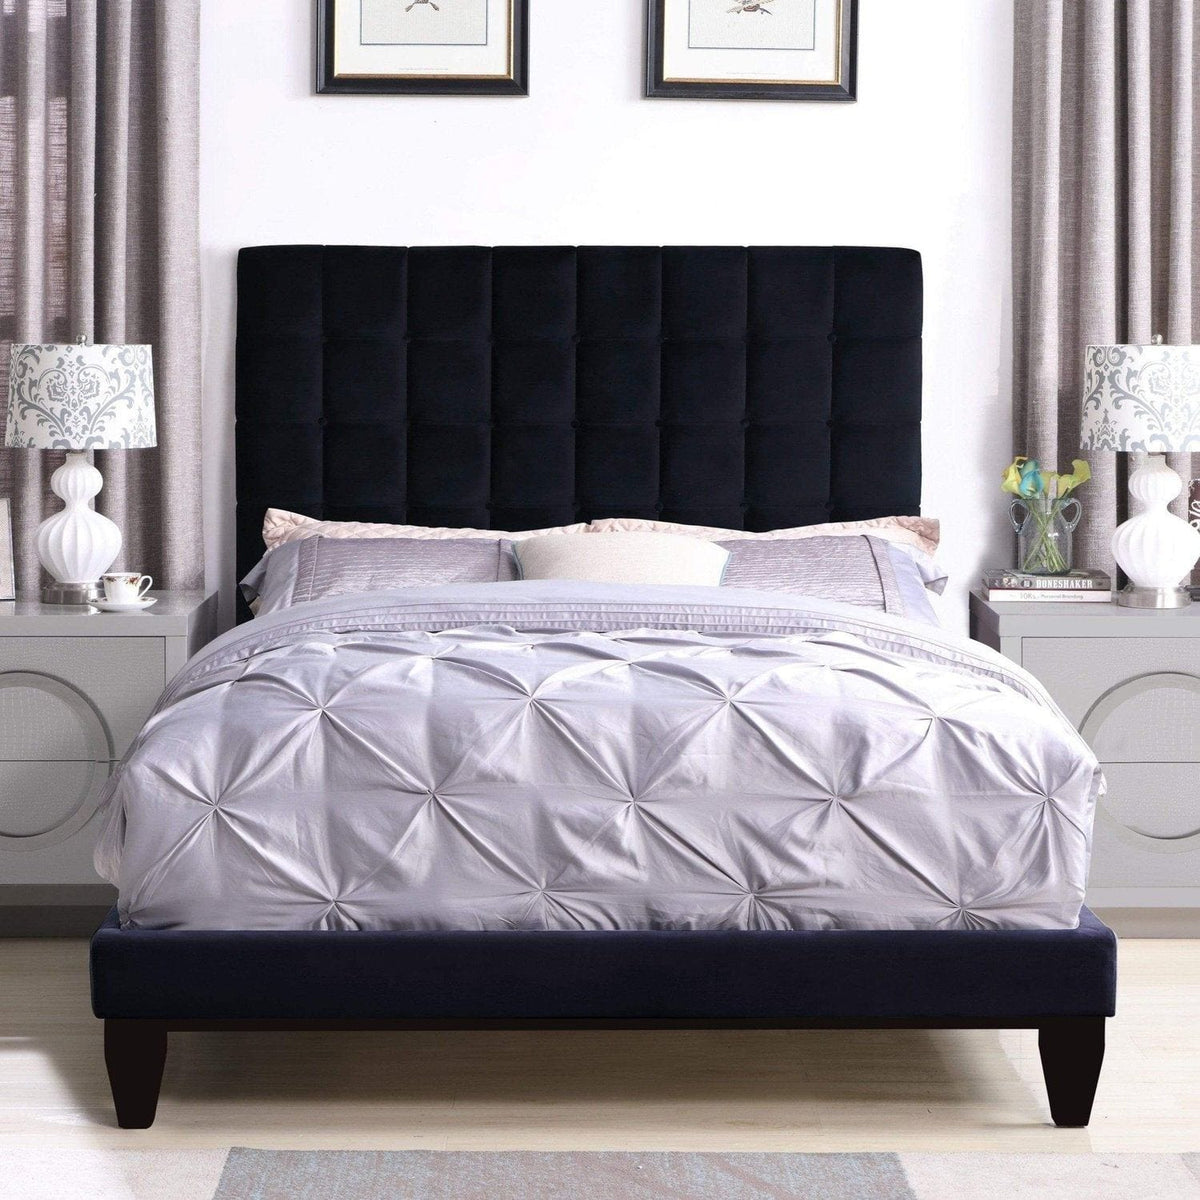 Iconic Home Beethoven Tufted Velvet Bed Frame With Headboard Black